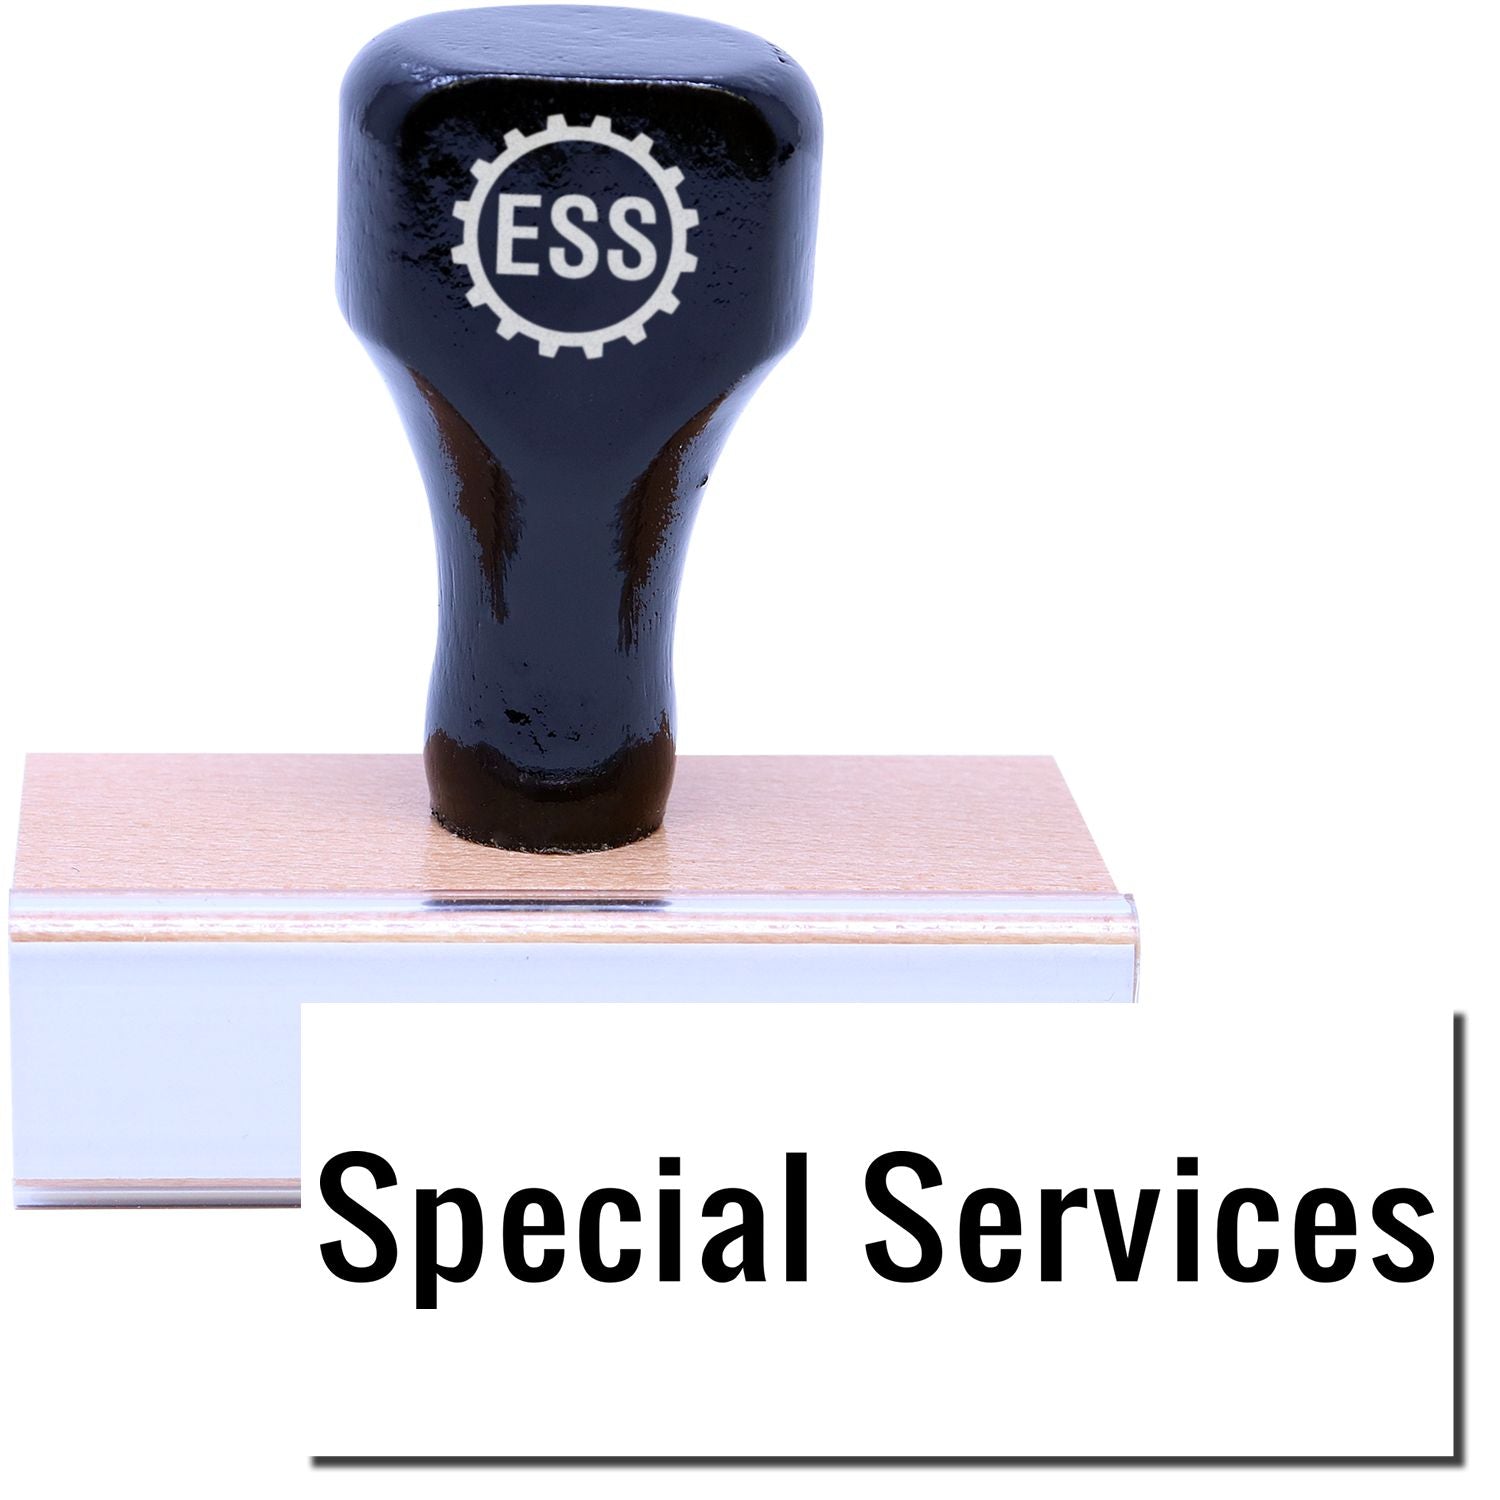 A stock office rubber stamp with a stamped image showing how the text "SPECIAL SERVICES" in a large font is displayed after stamping.